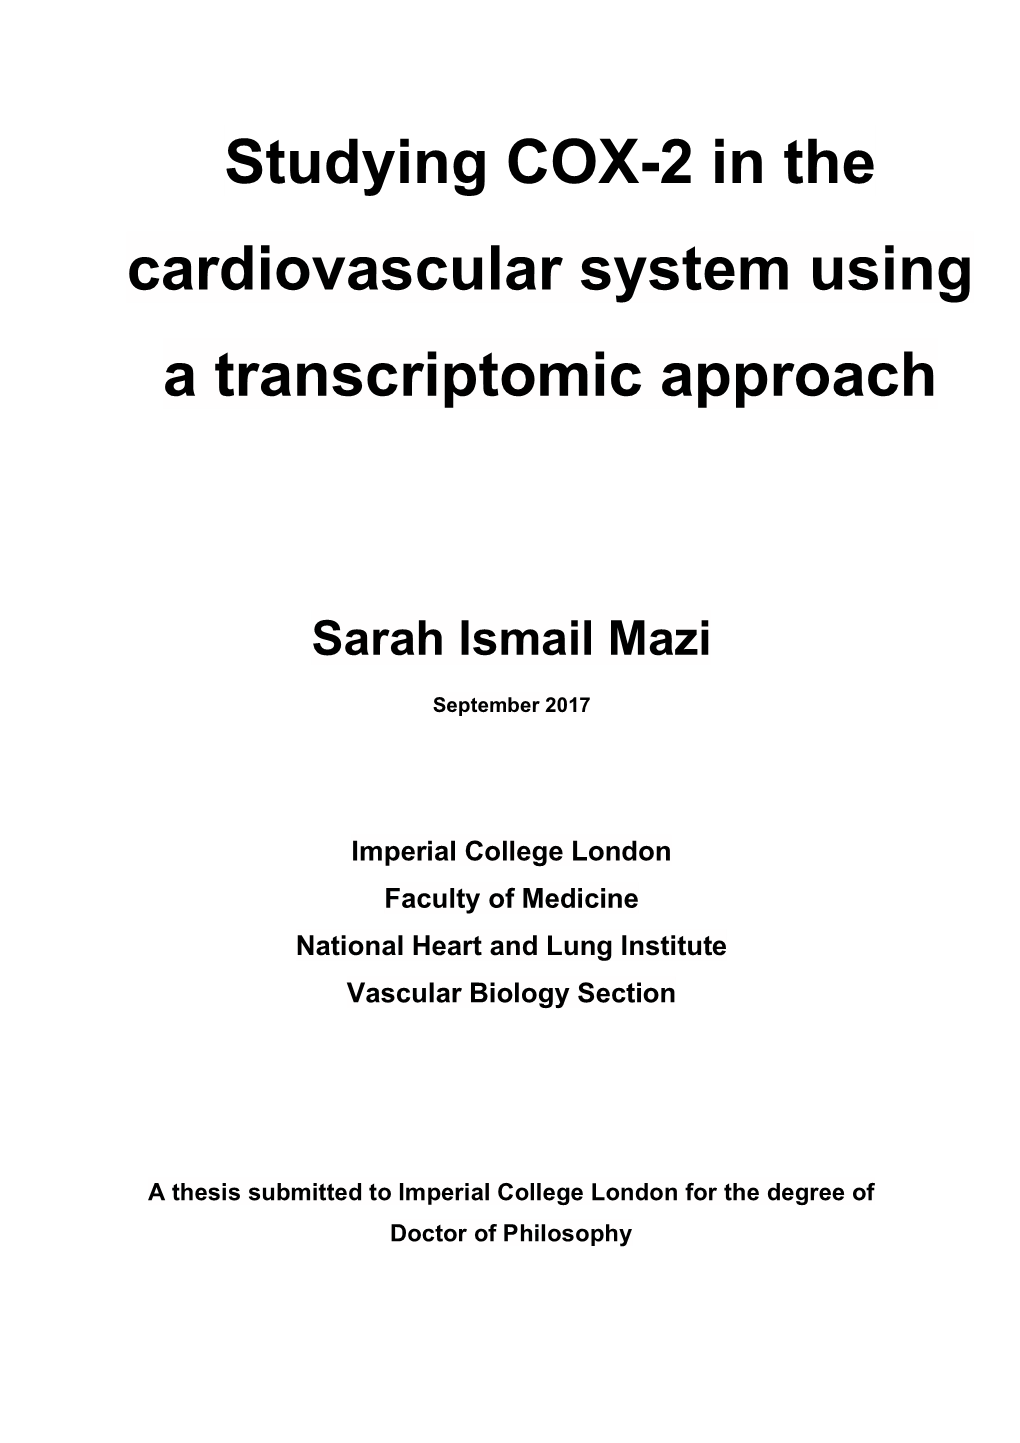 Studying COX-2 in the Cardiovascular System Using a Transcriptomic Approach